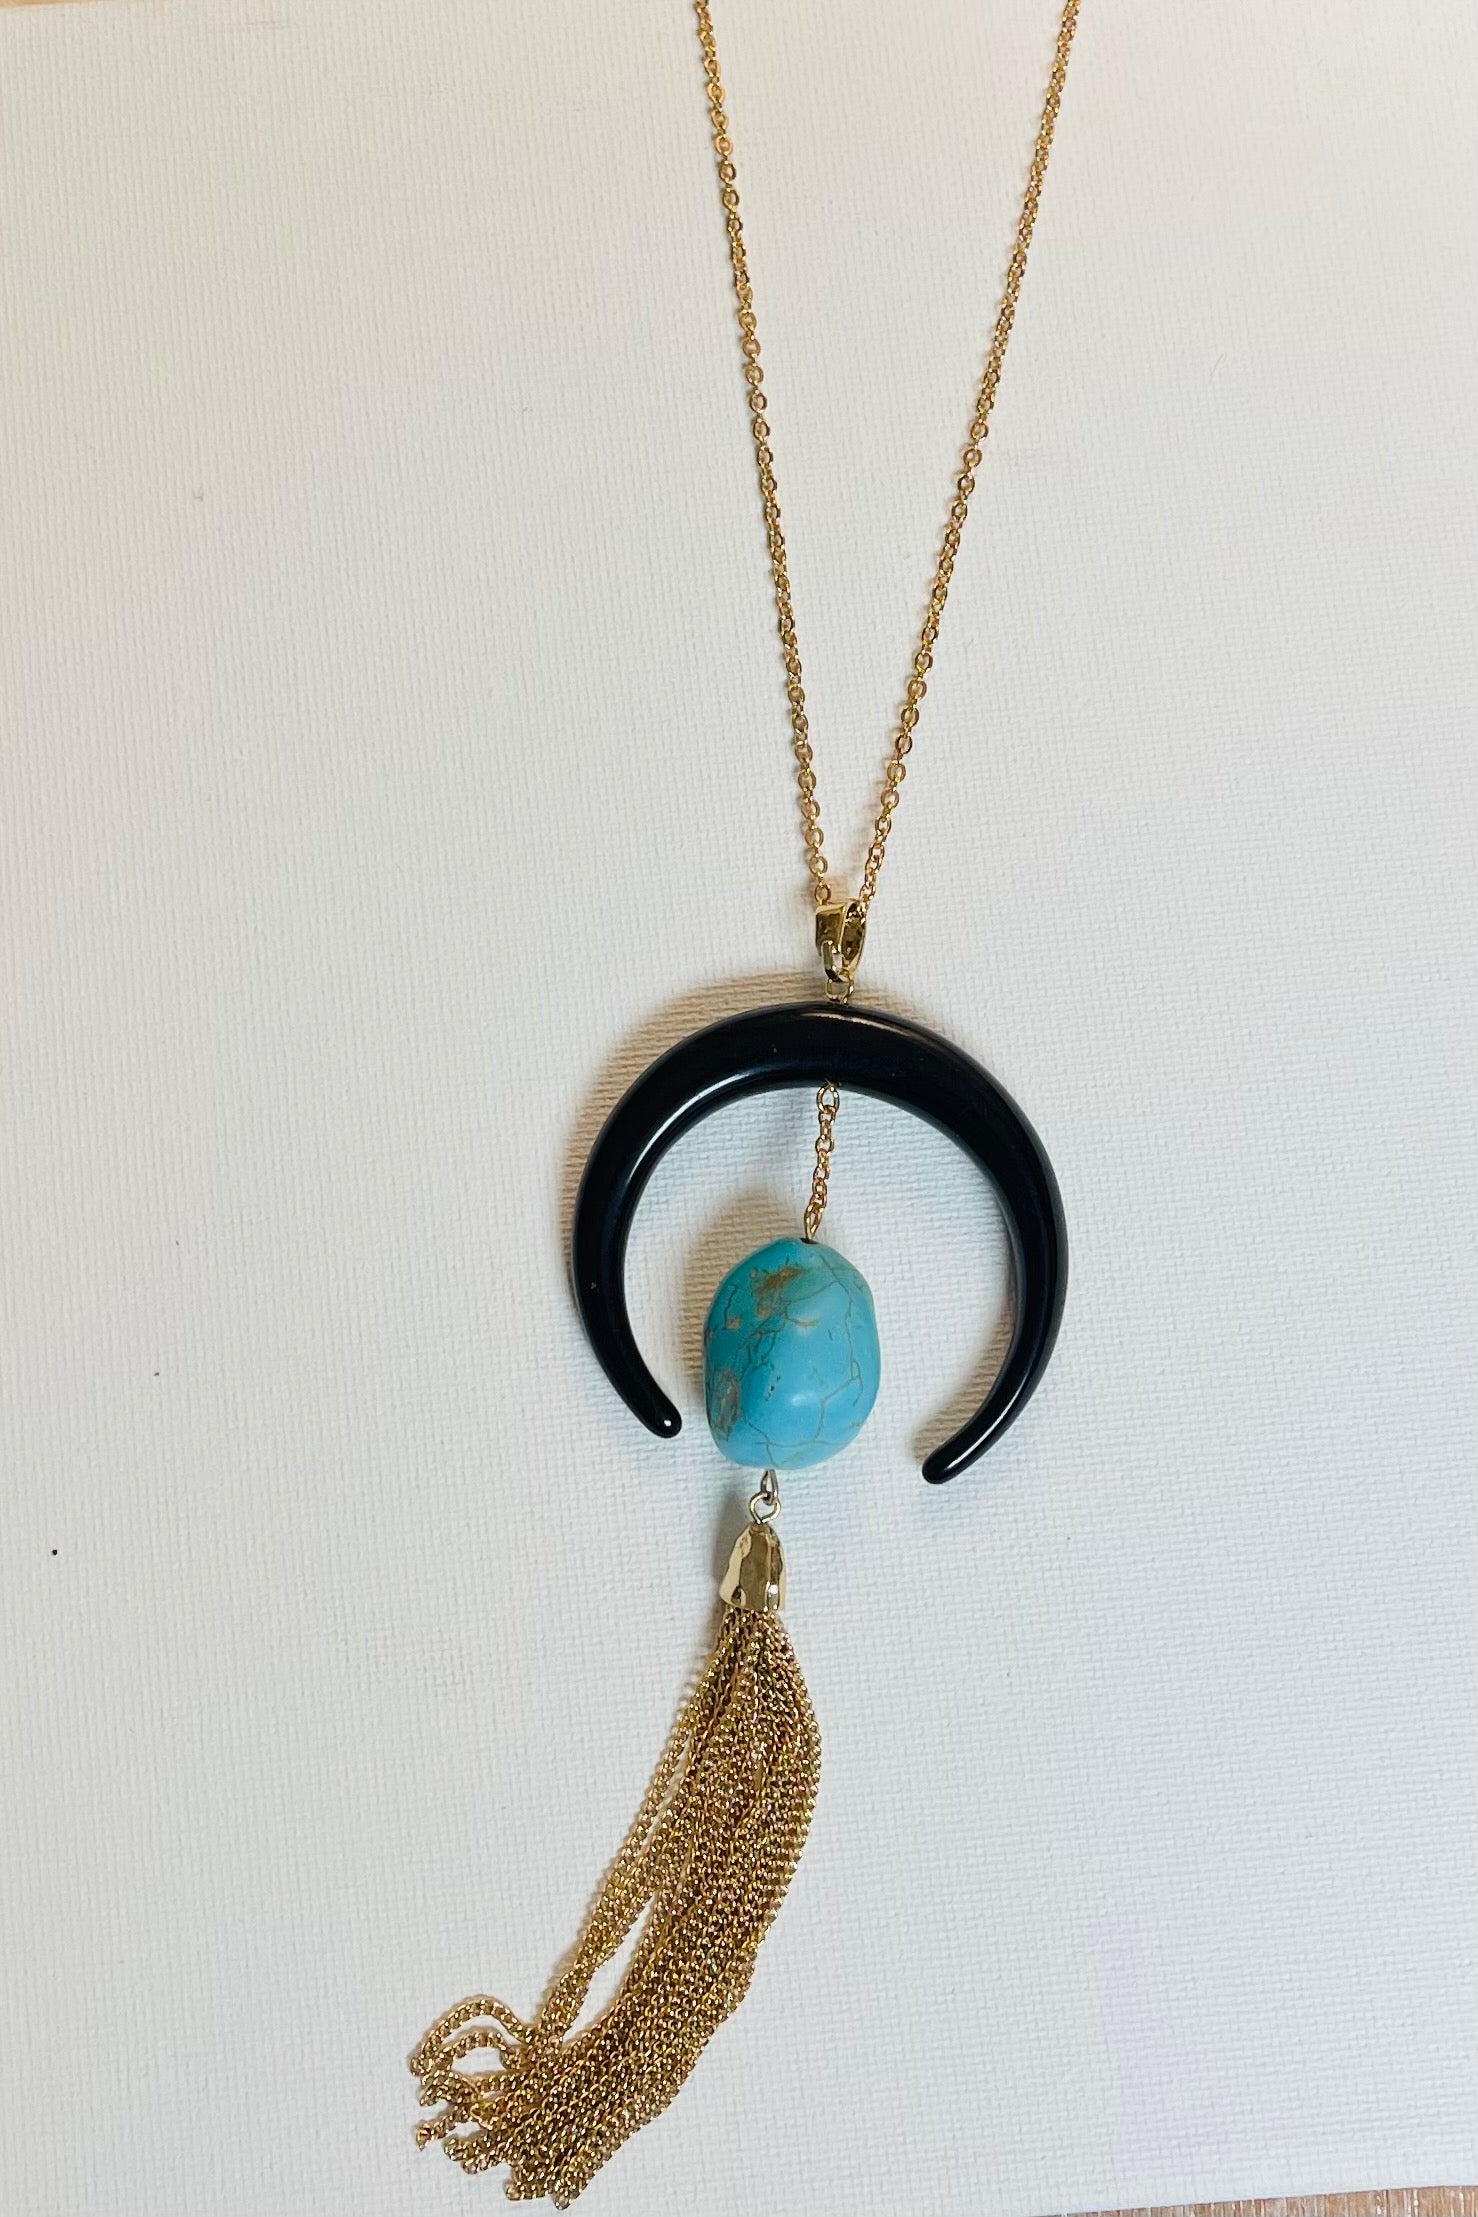 Gold Long Chain Necklace with Turquoise/BLack